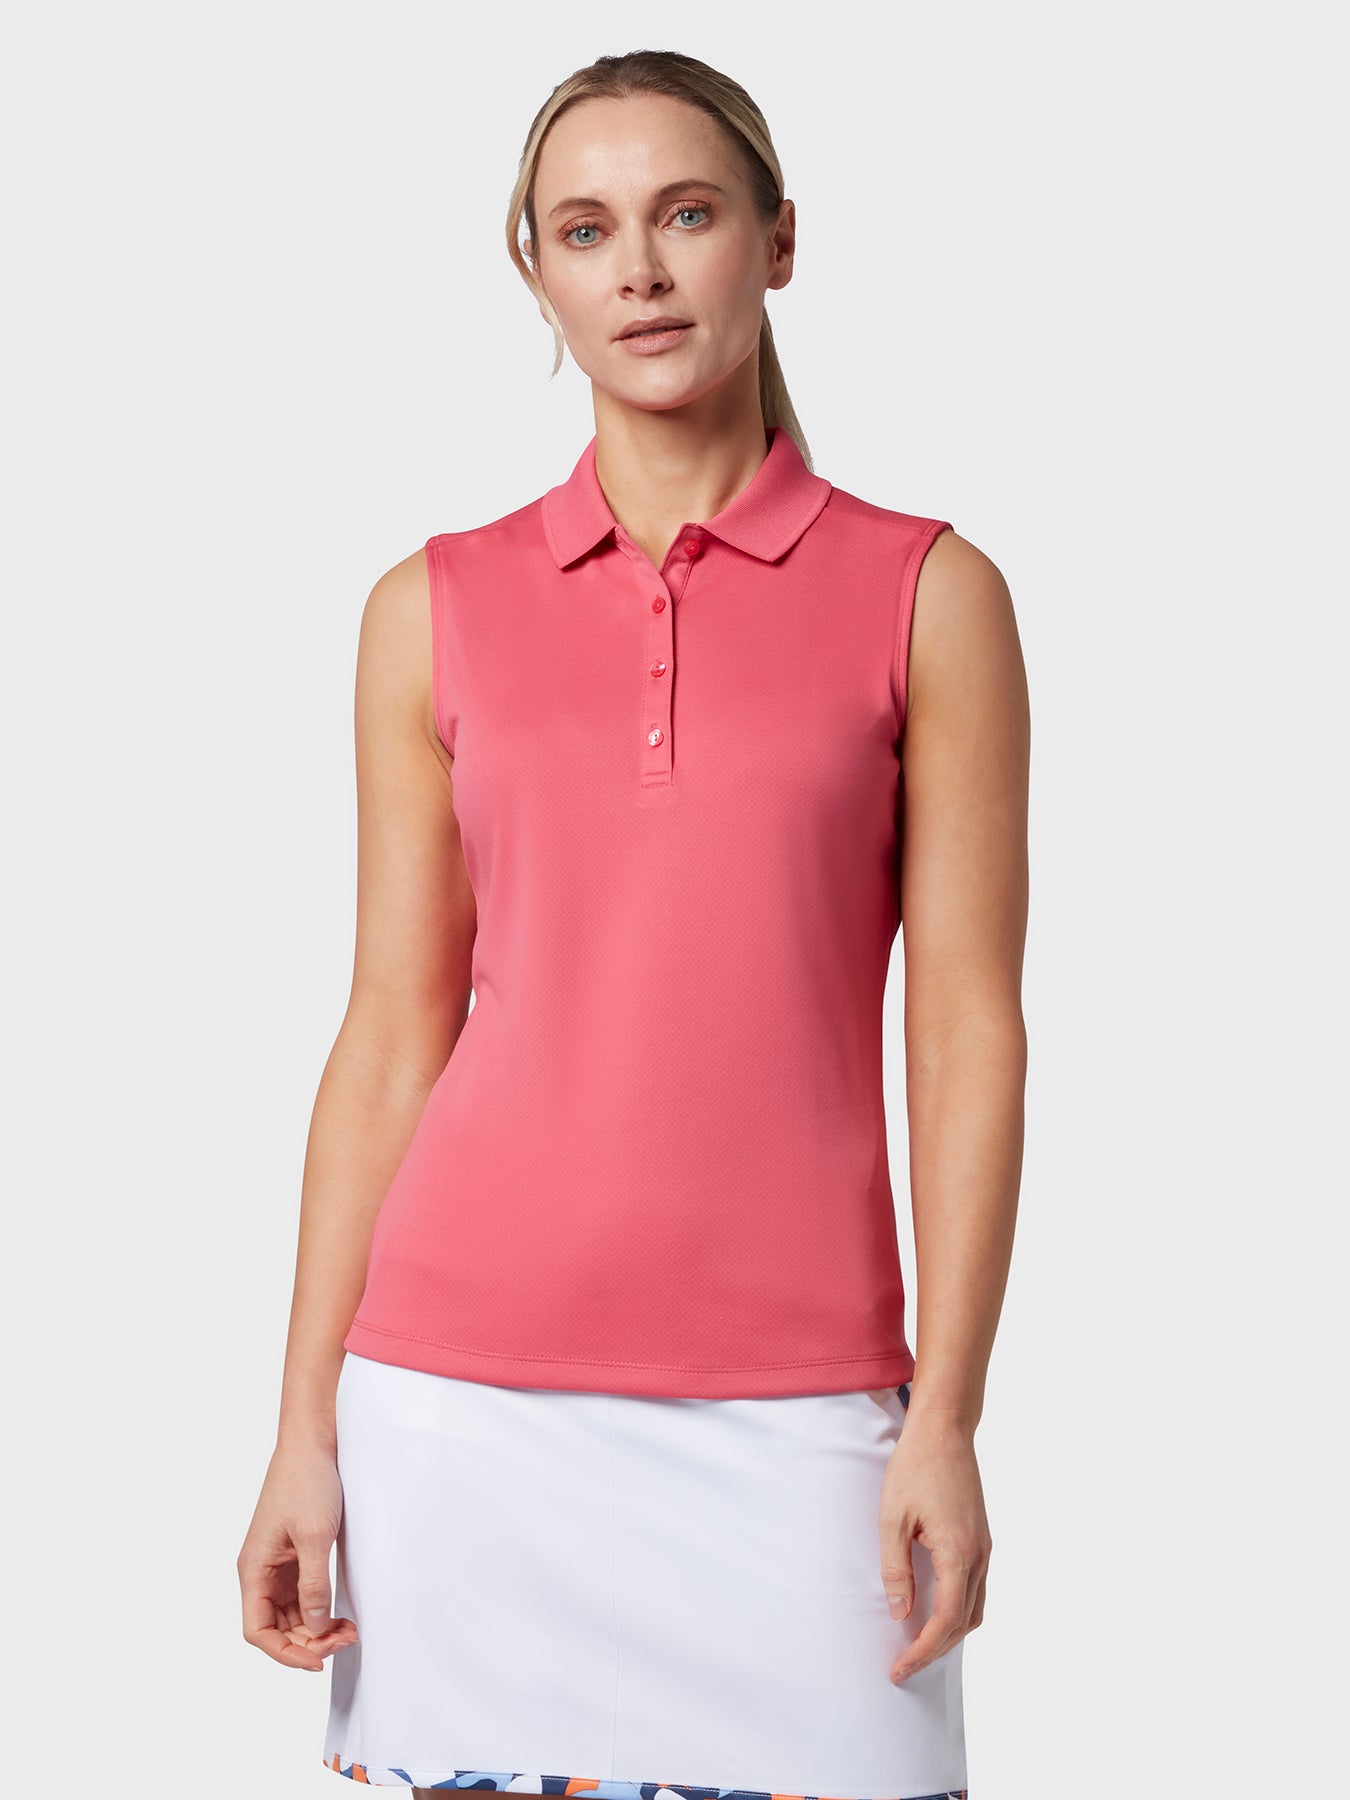 View Sleeveless Womens Polo In Fruit Dove Fruit Dove XS information